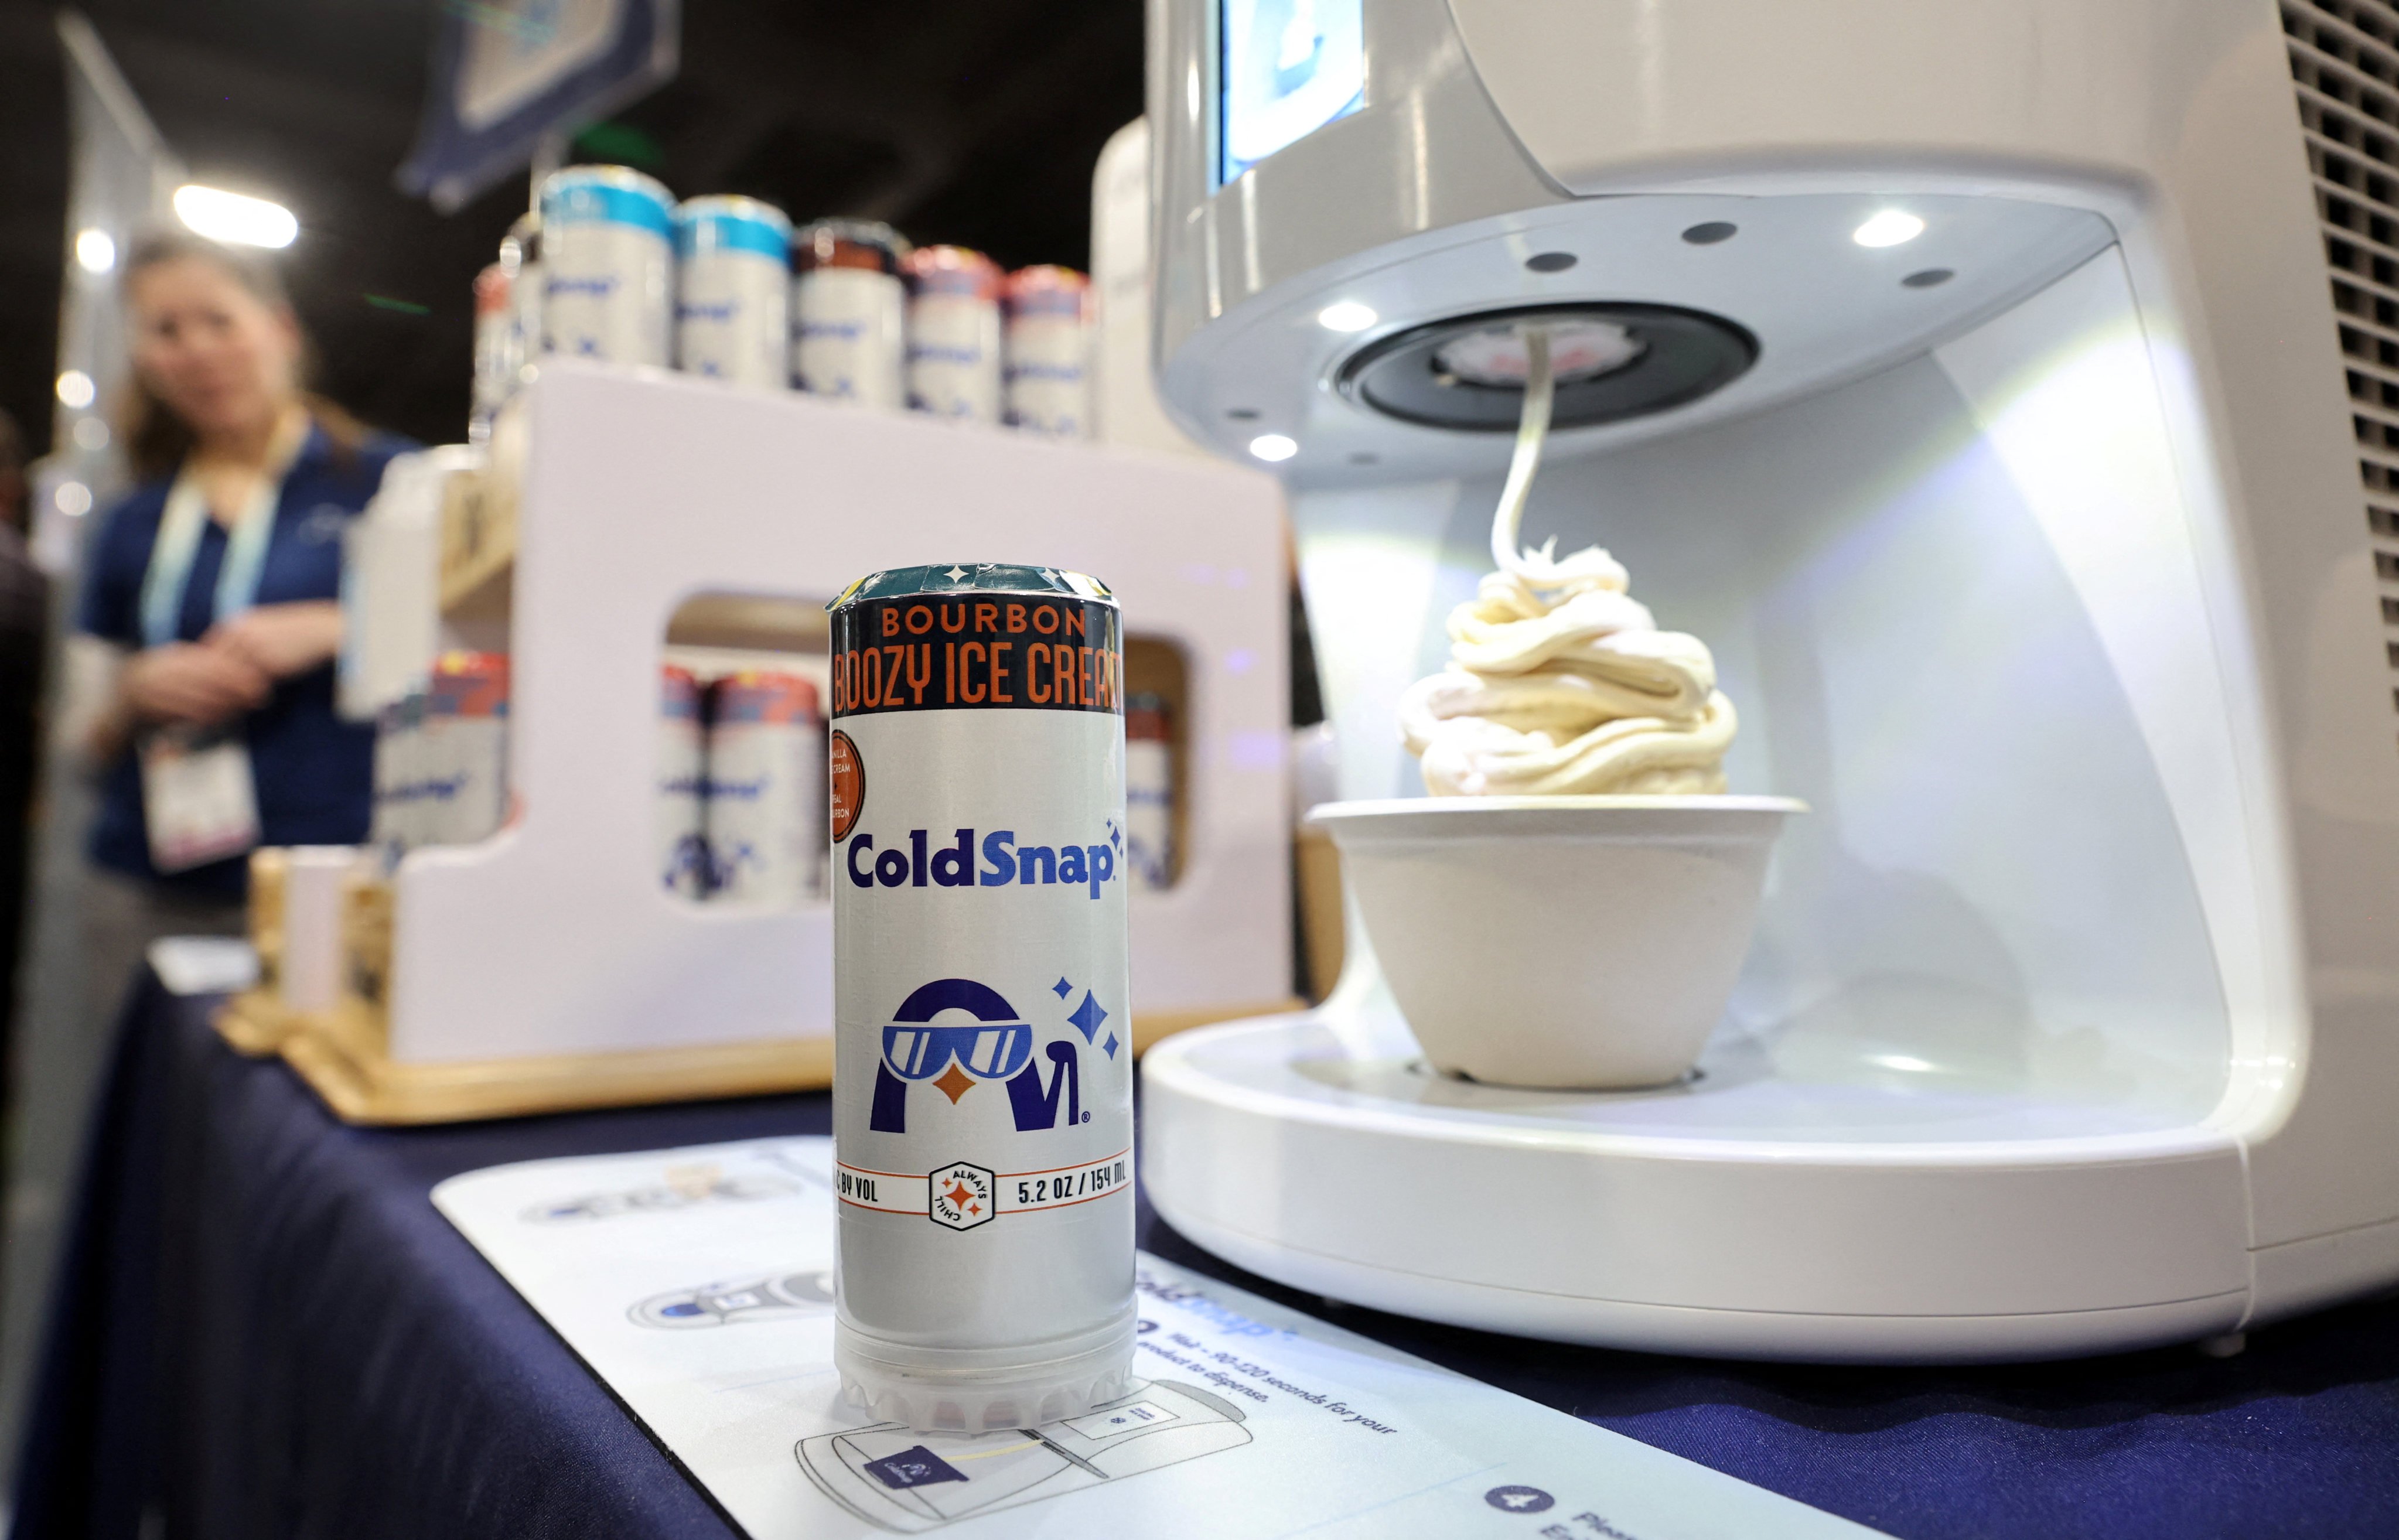 ColdSnap’s no-clean ice cream machine, which, makes ice cream in two minutes from shelf-stable pods, was one of the hi-tech kitchen appliances shown at CES 2024, where many products used AI to make cooking much easier. Photo: Reuters